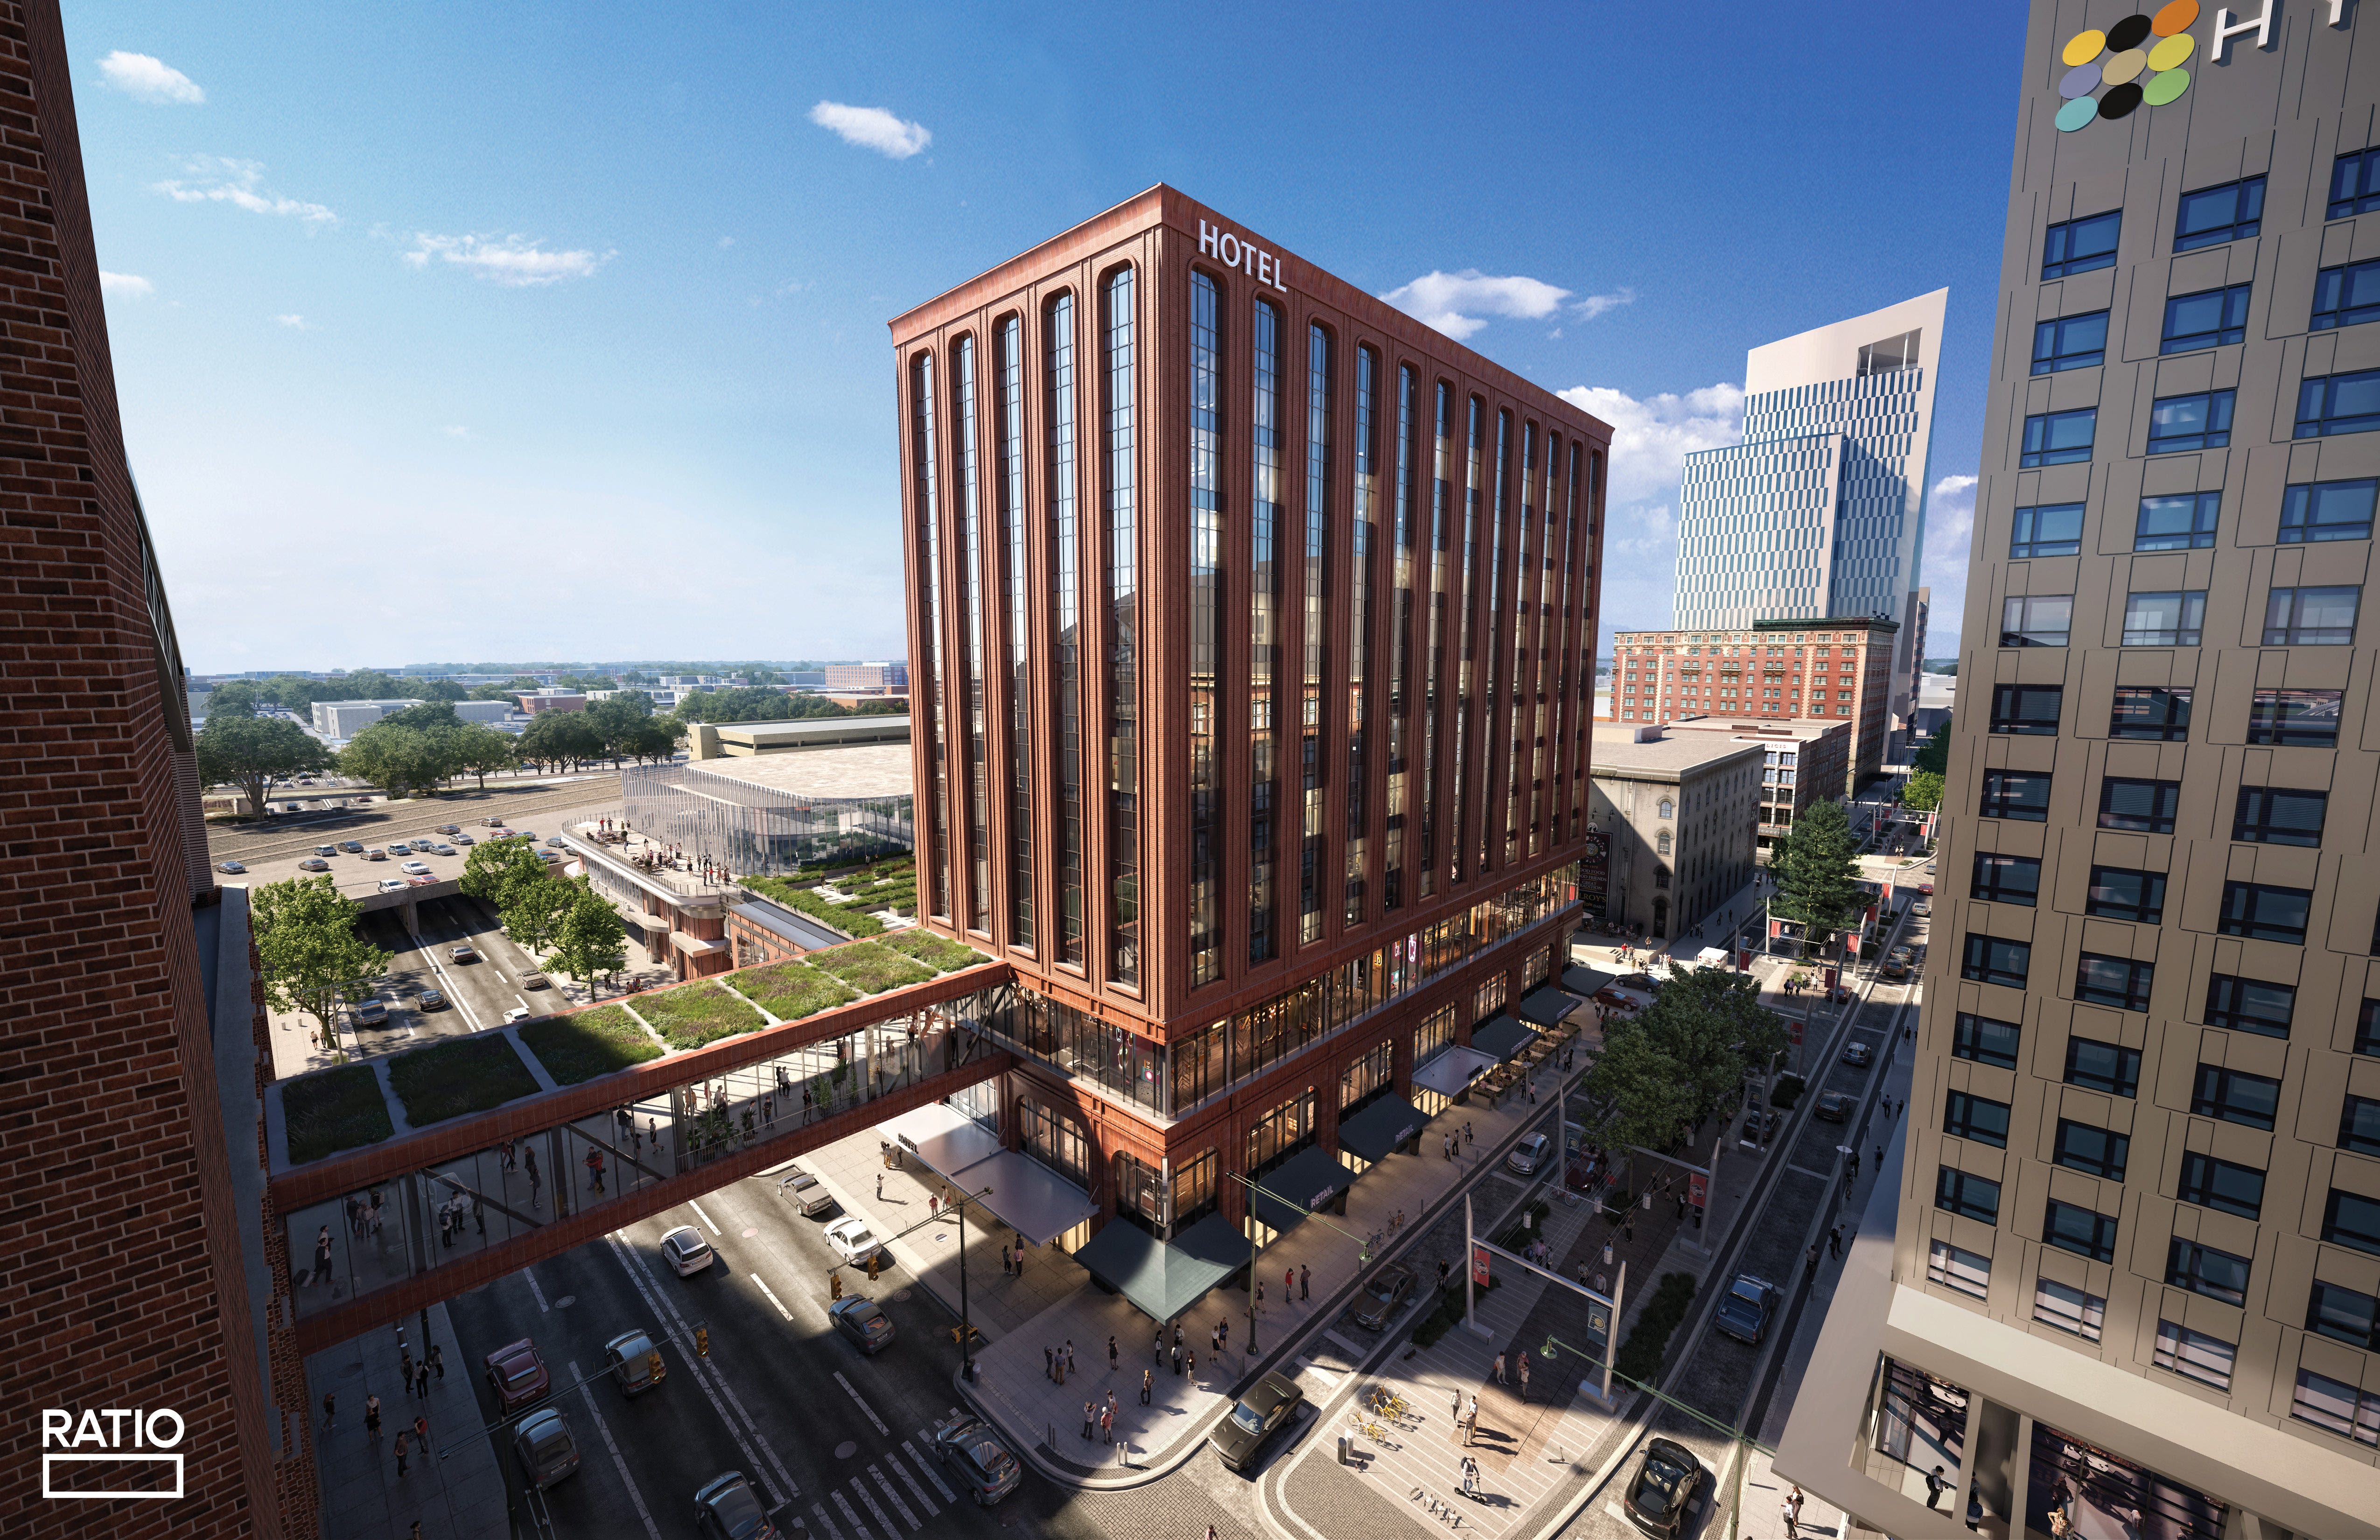 A Shinola hotel, music venue may replace the old CSX warehouse in downtown Indianapolis